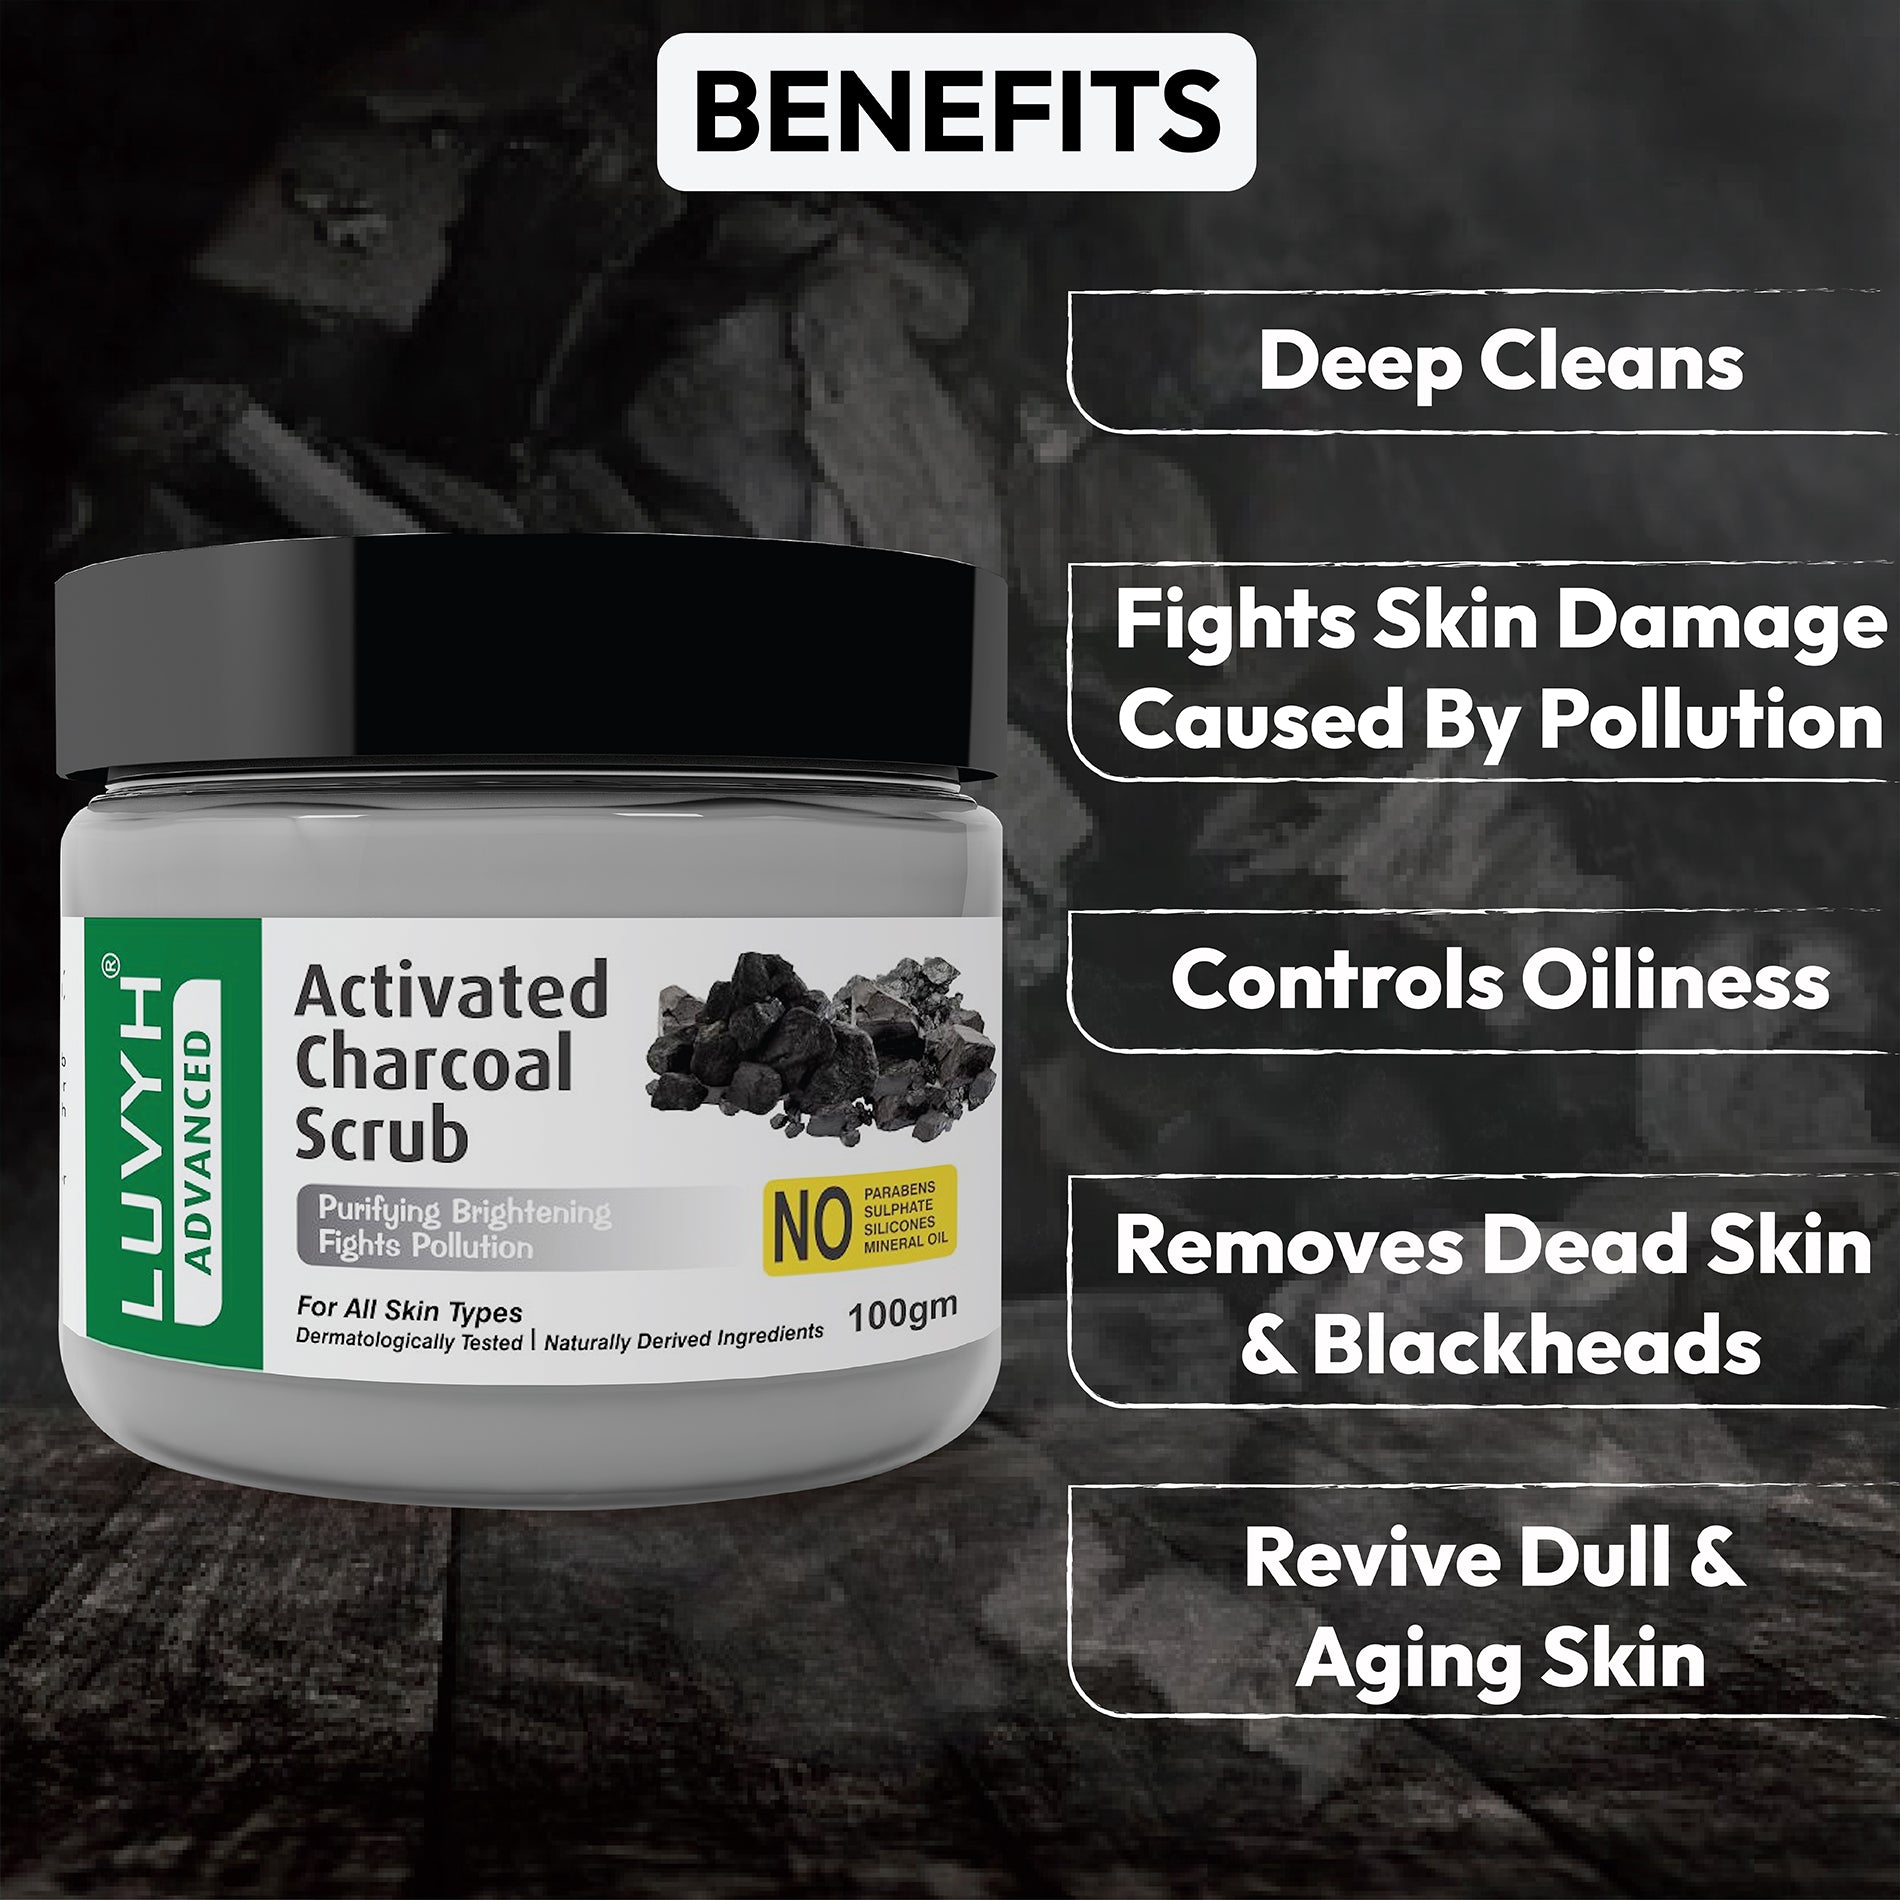 Benefits of Activated Charcoal Scrub